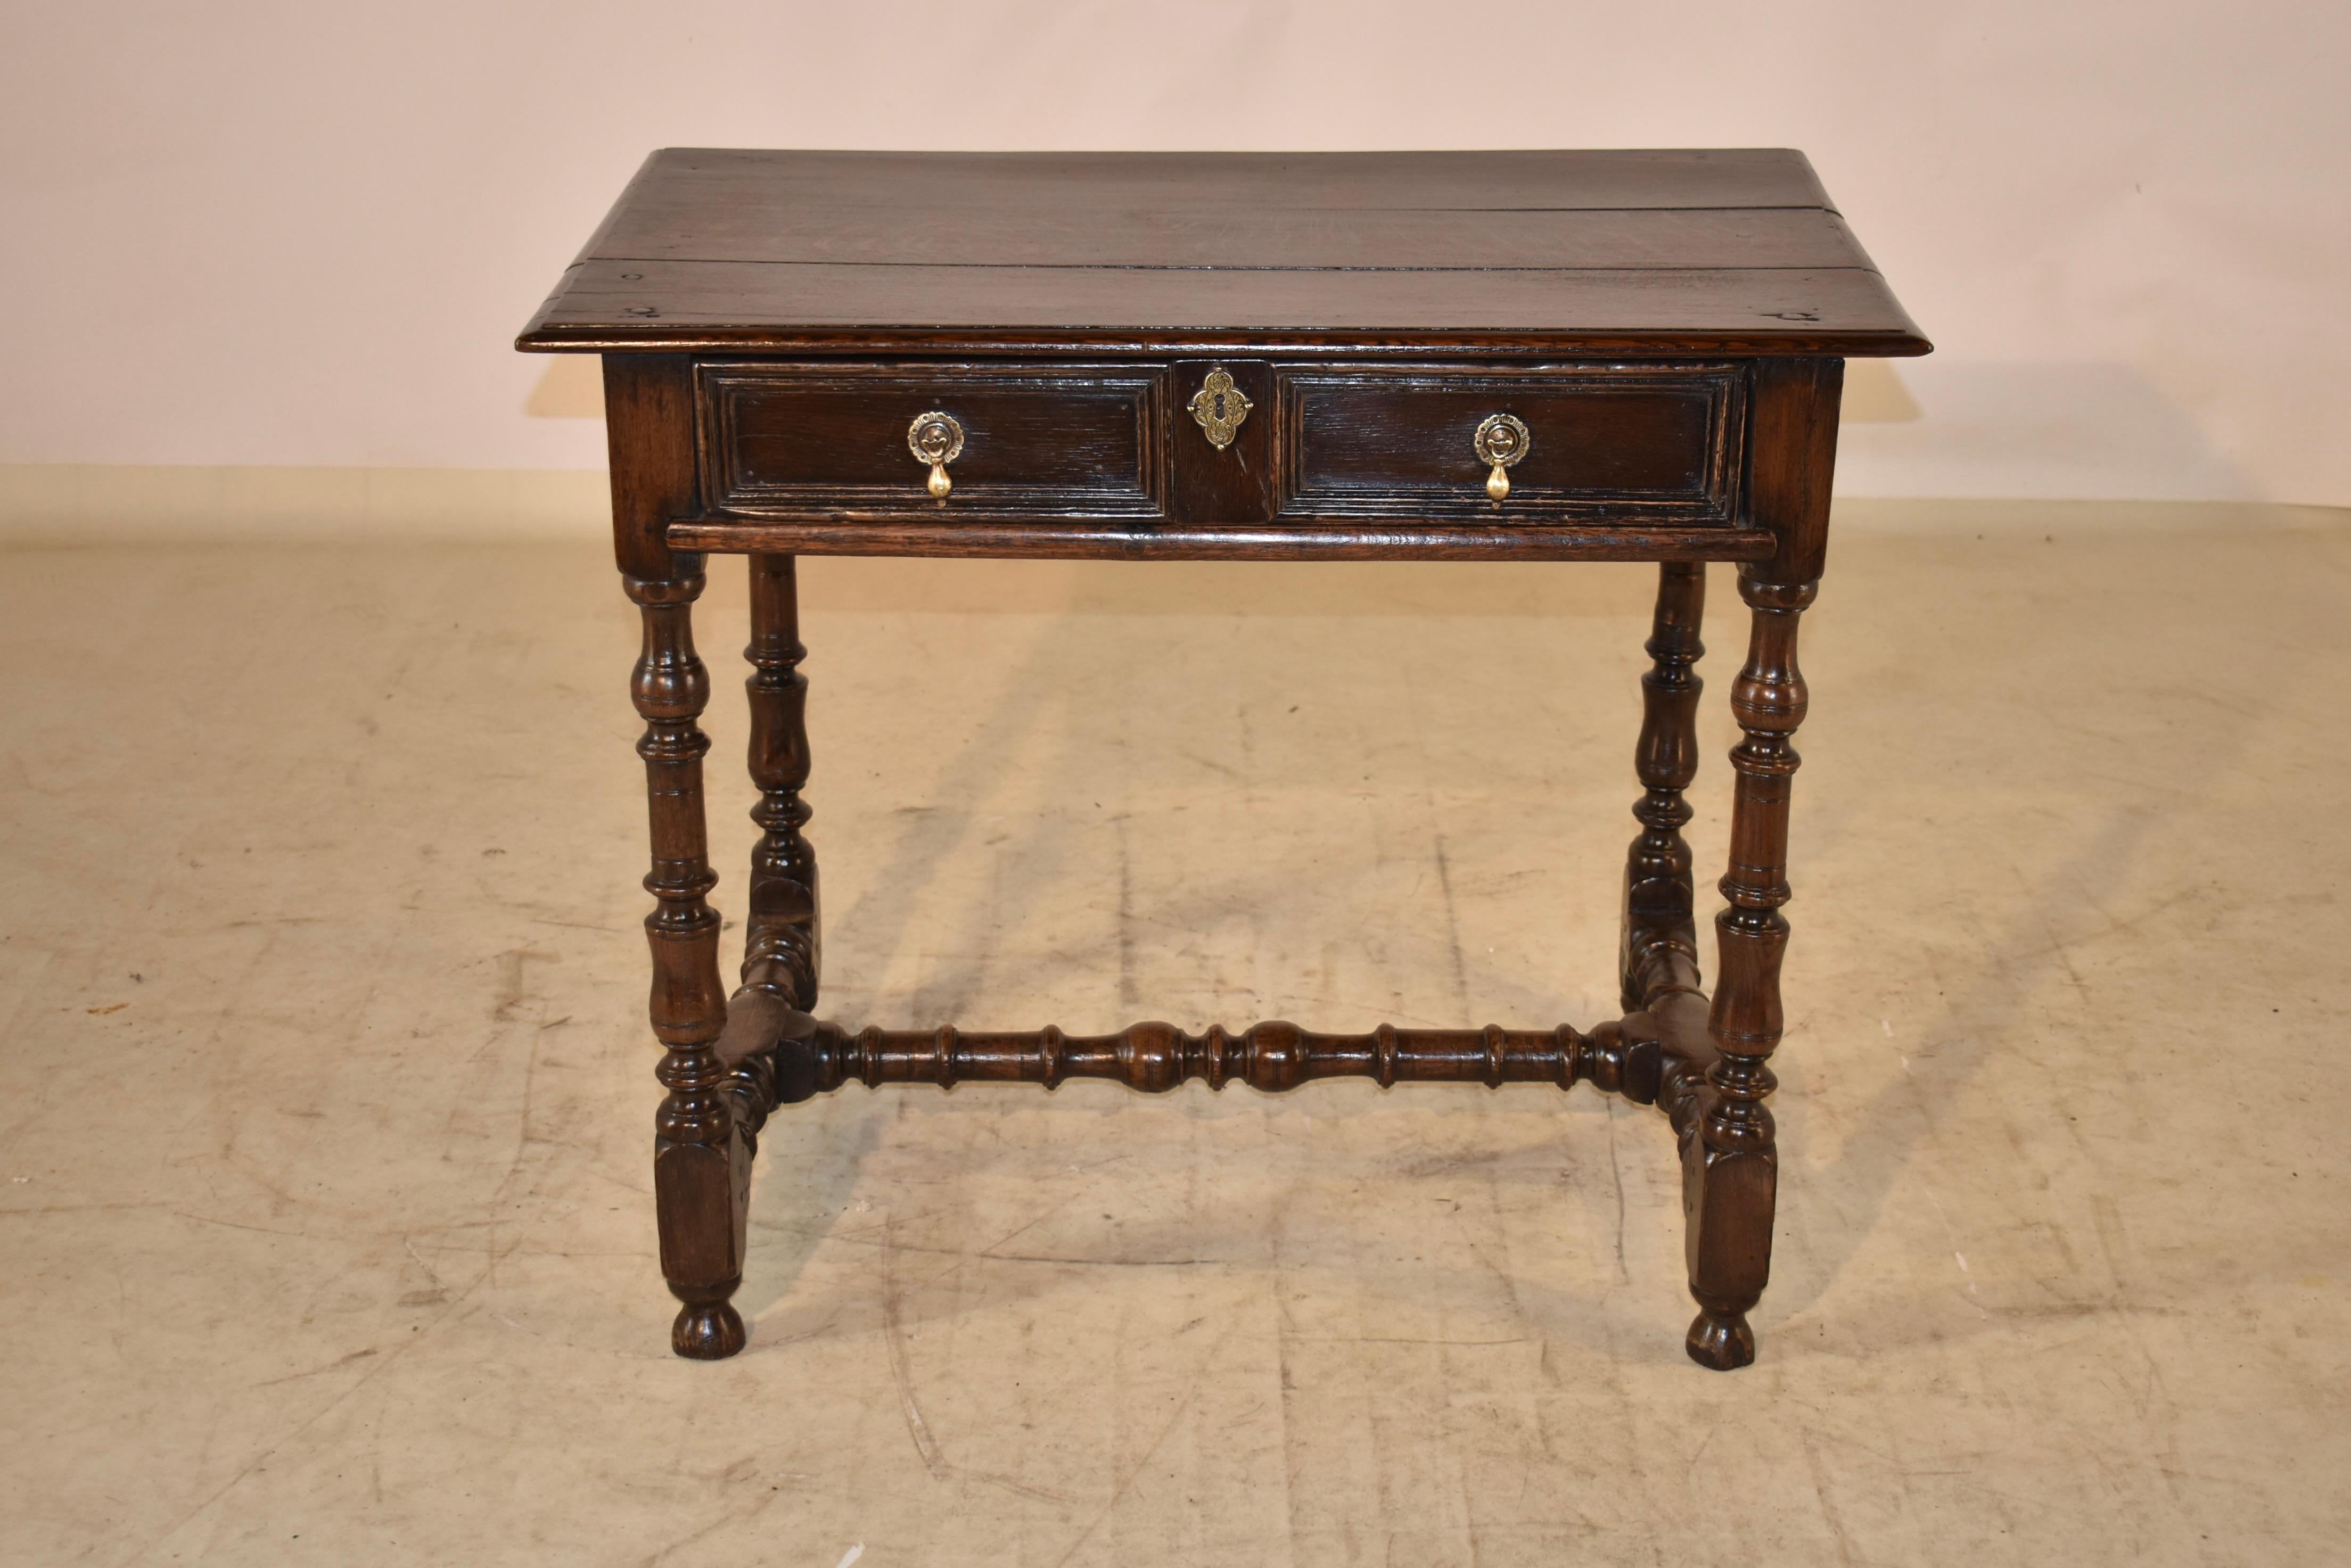 Late 17th-Early 18th century oak side table from England. The top is made from three boards, all with pegged construction and a beveled edge, following down to simple sides which feature a carved decorated band and a single drawer in the front,